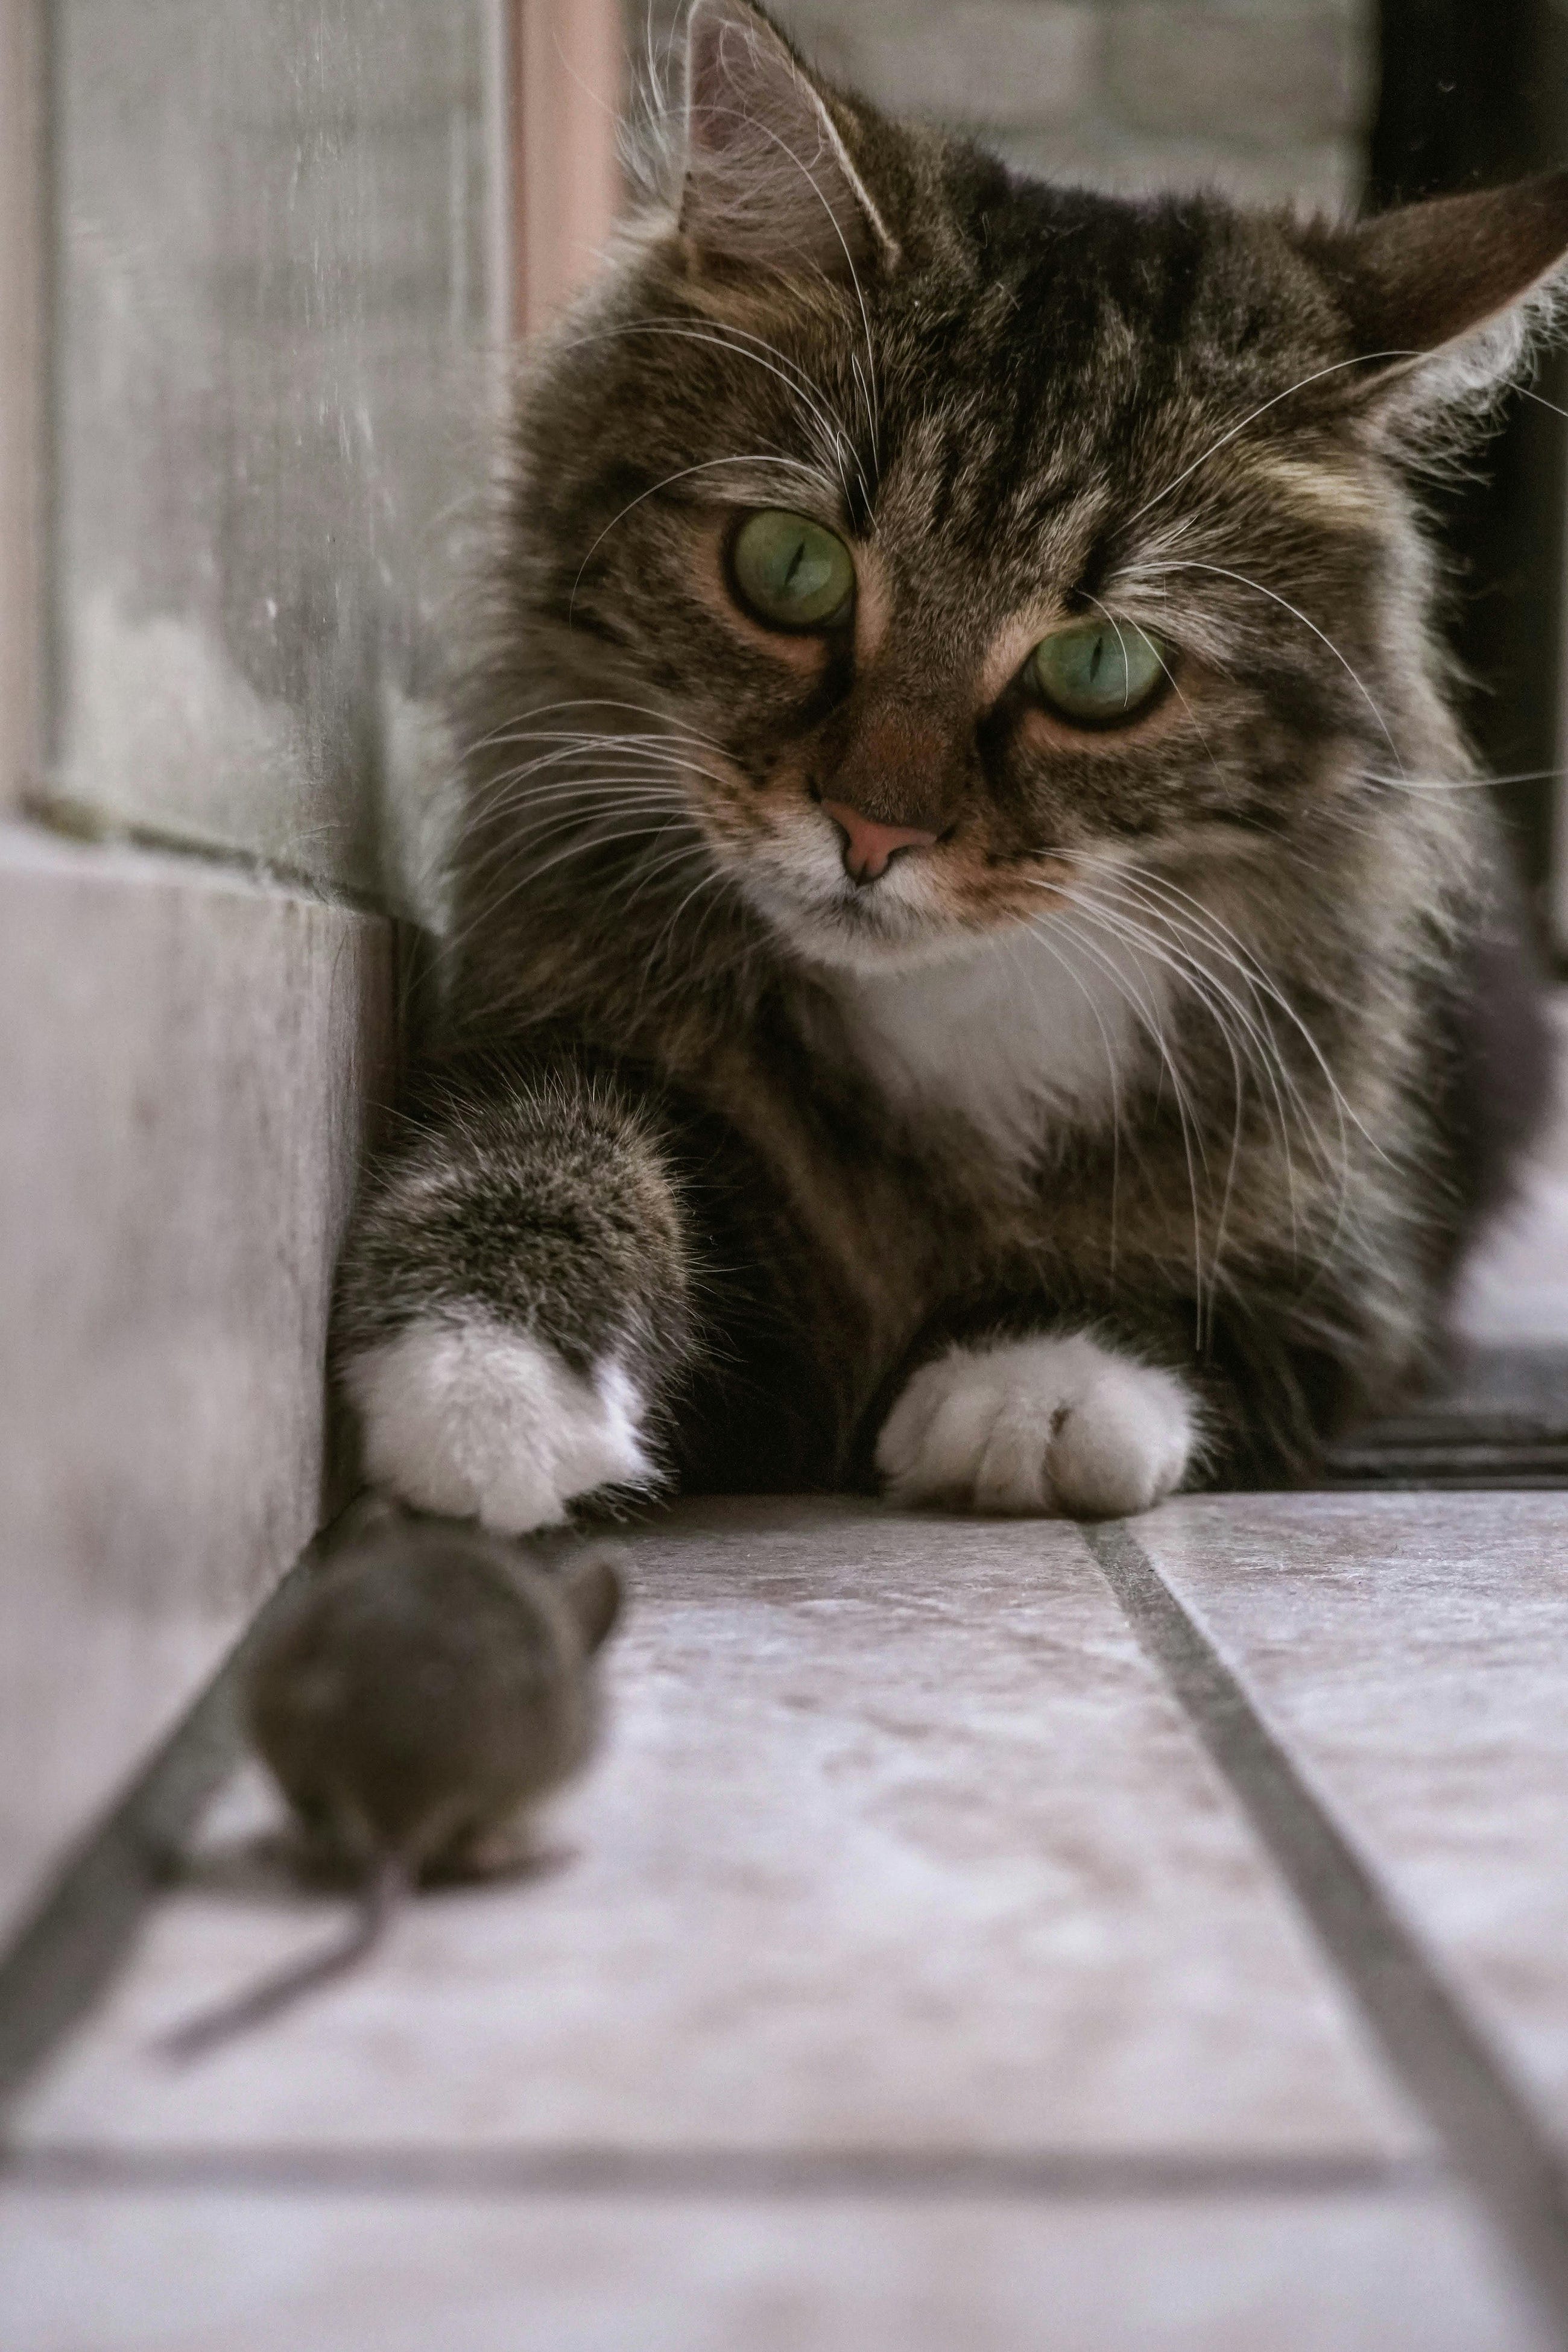 The Real Reason… Cats Chase Mice